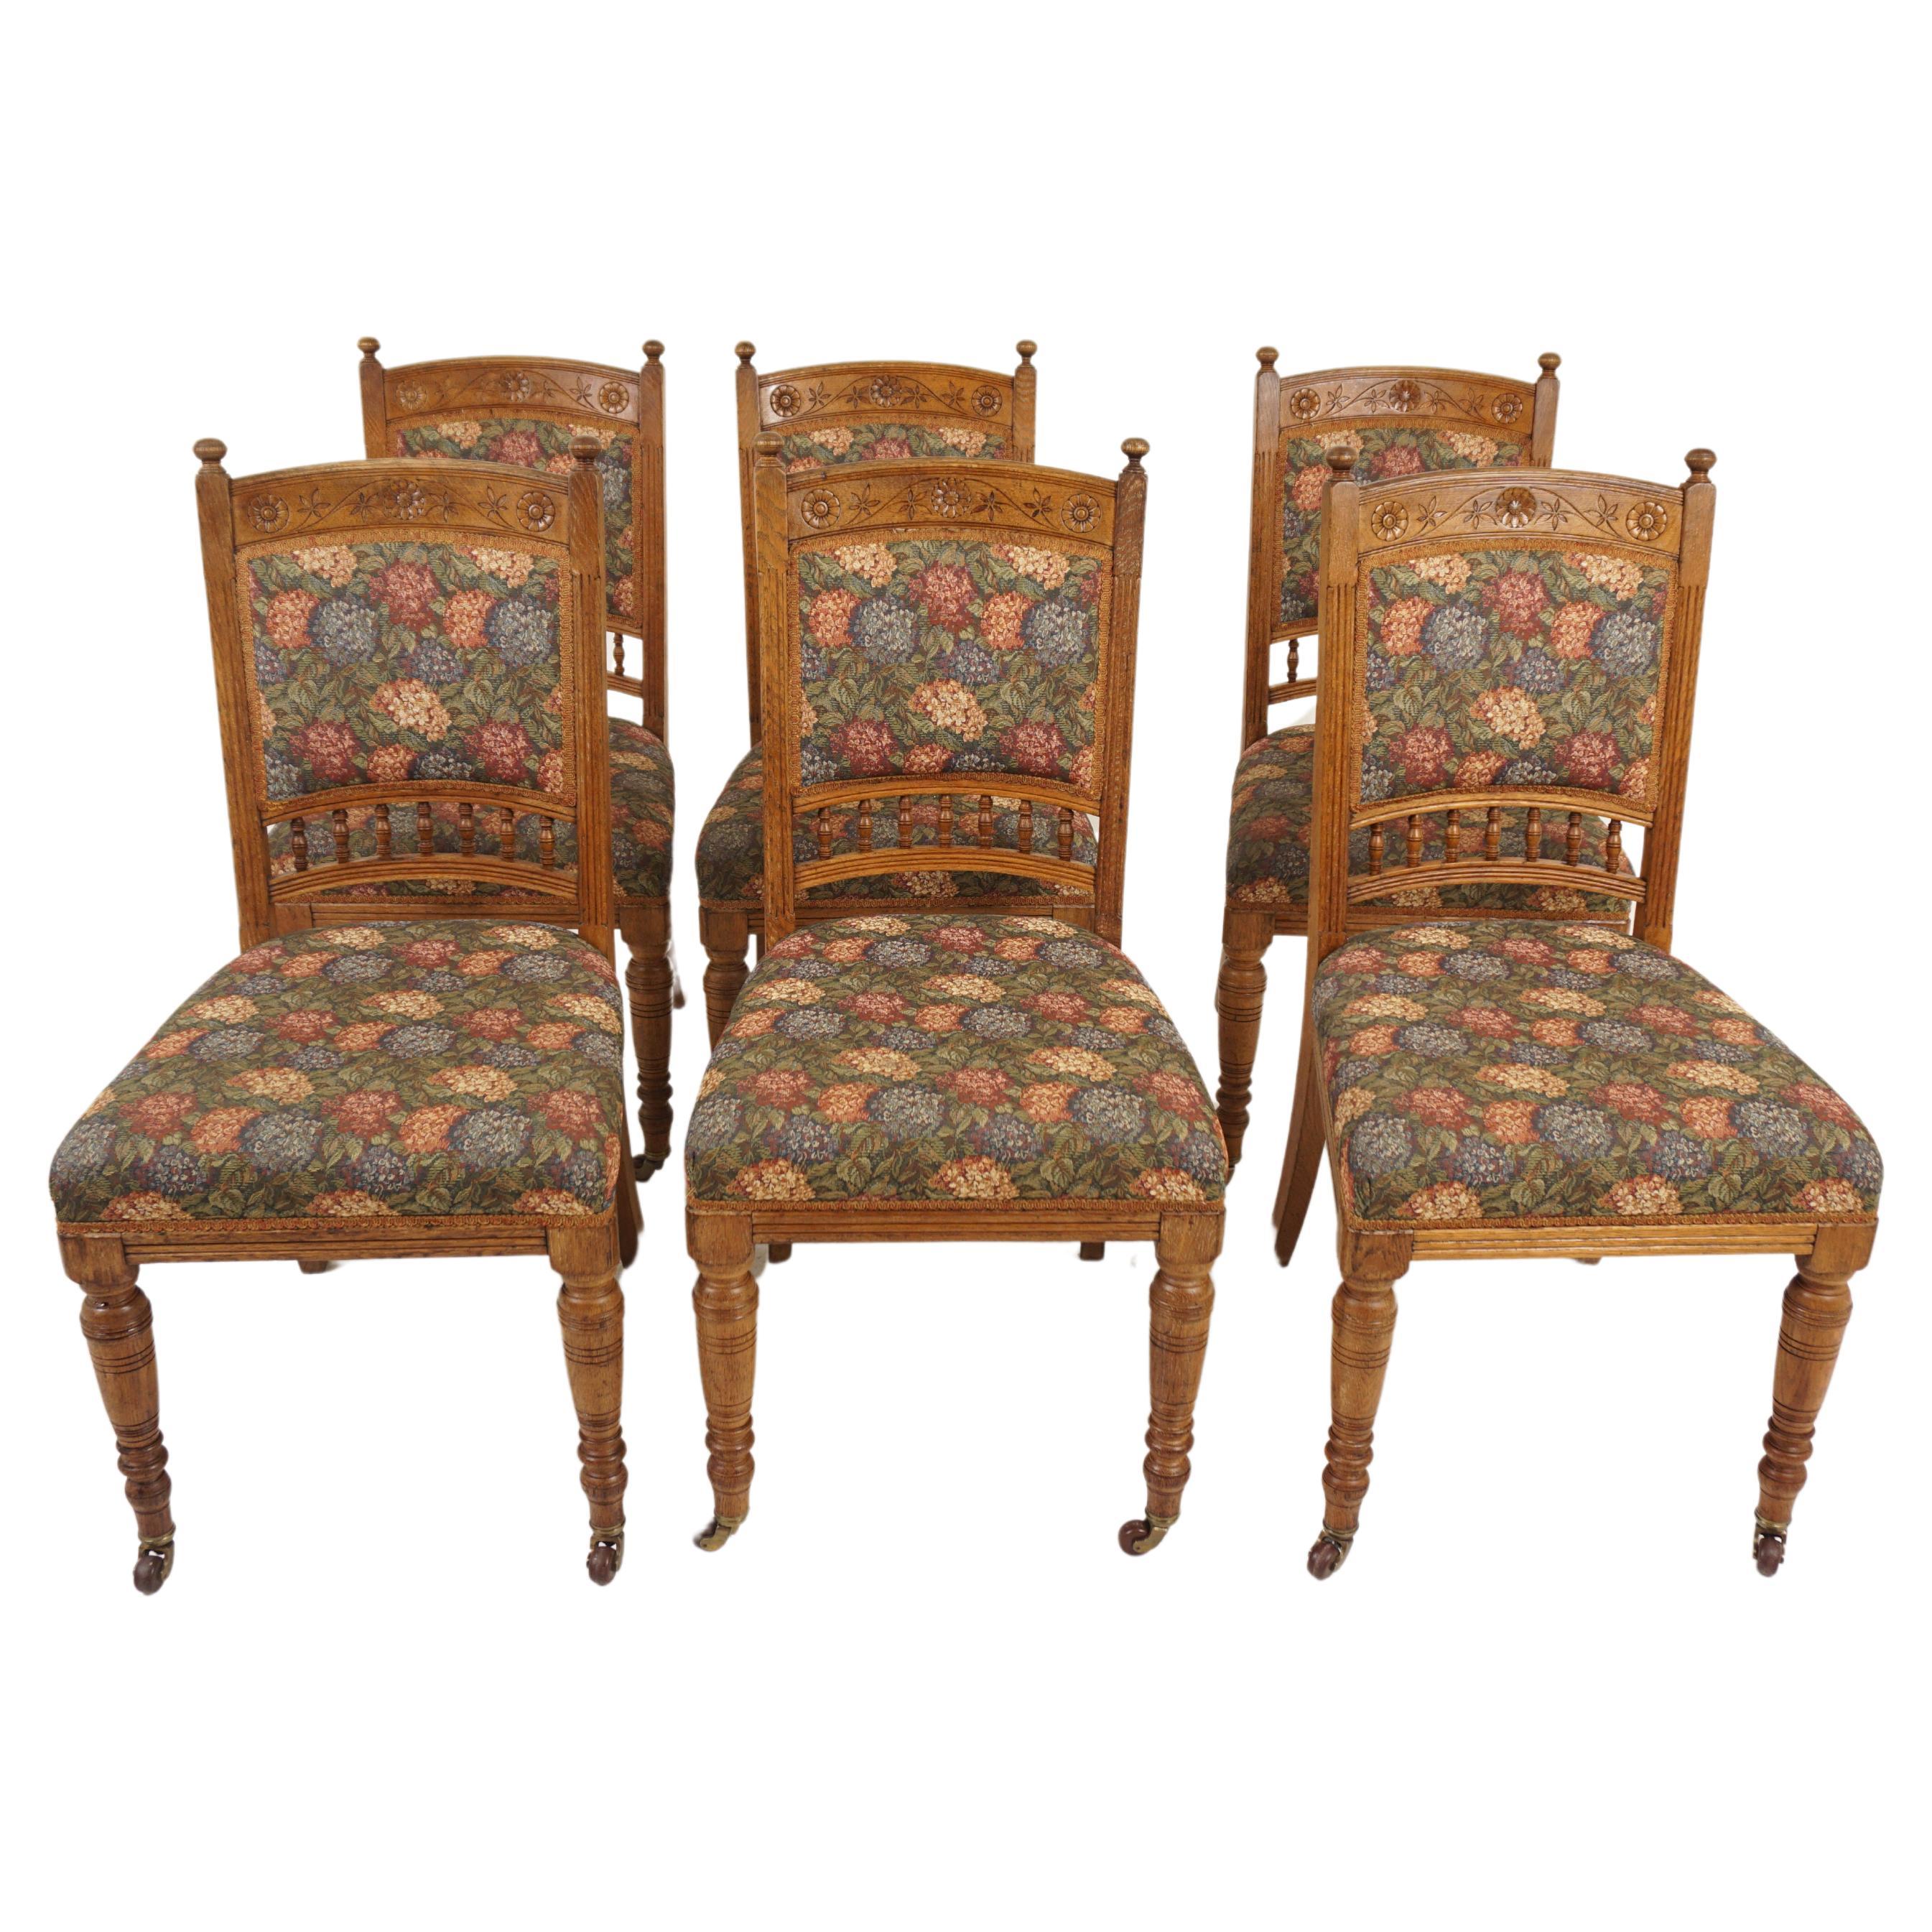 6 Victorian Oak Upholstered Dining Chairs, Scotland 1880, H1169 For Sale